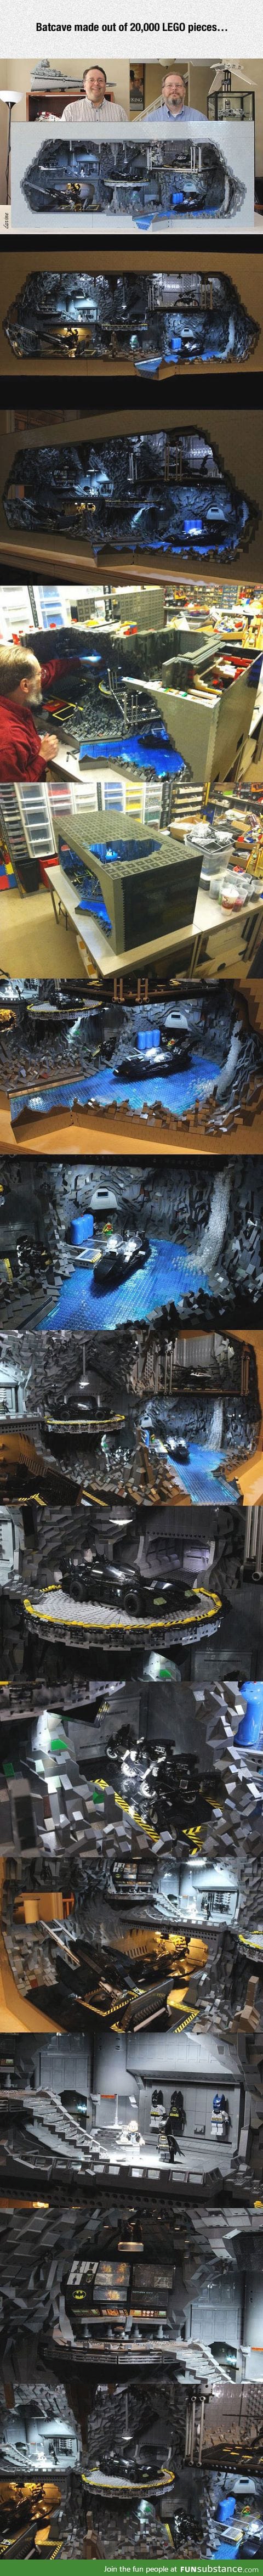 Massive batcave made with legos